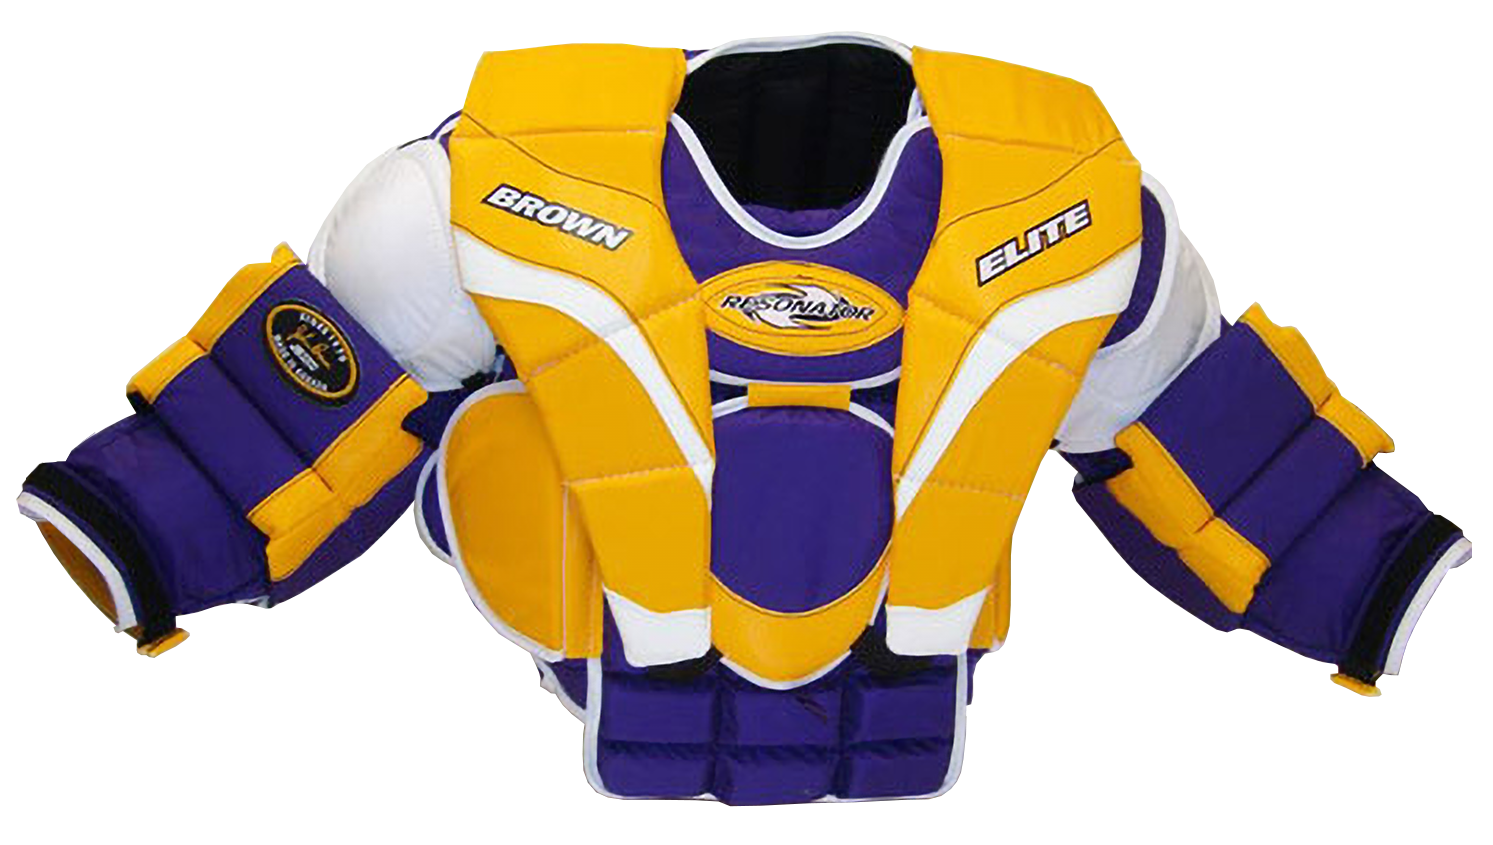 2200 purple, yellow and white chest protector